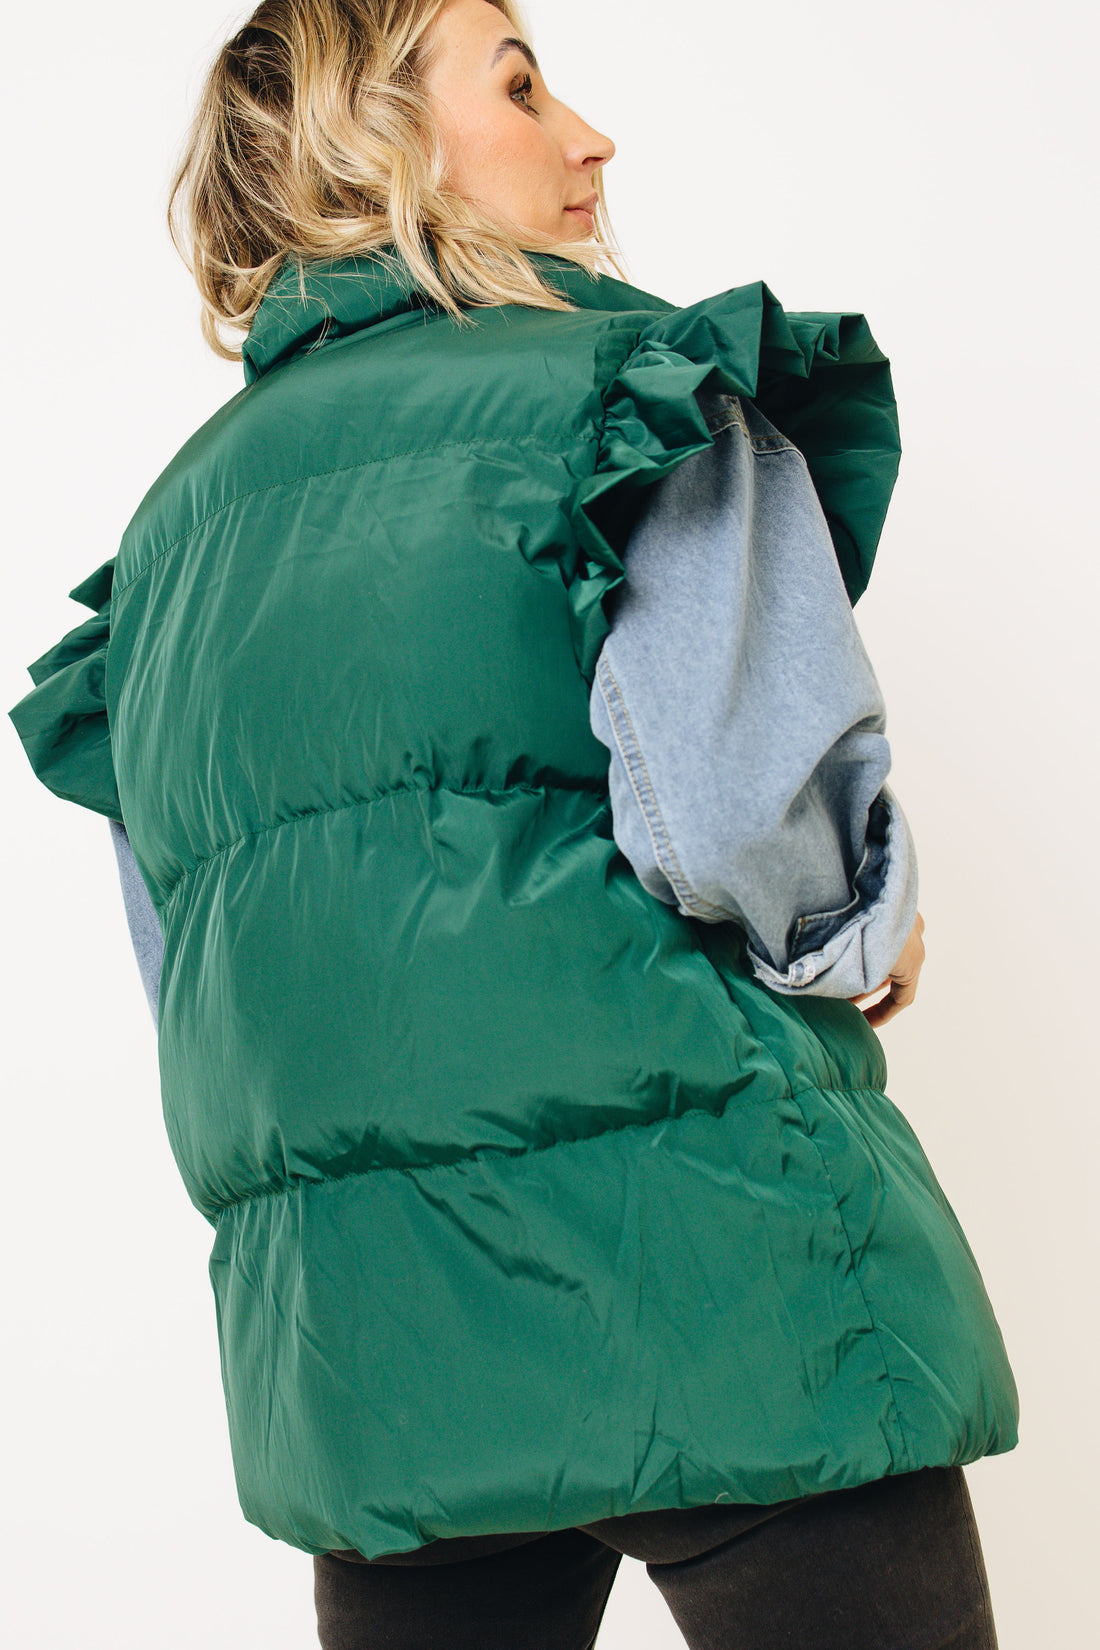 Ivy Exclusive - Ruffle Sleeve Vest In Hunter Green (S-3XL)